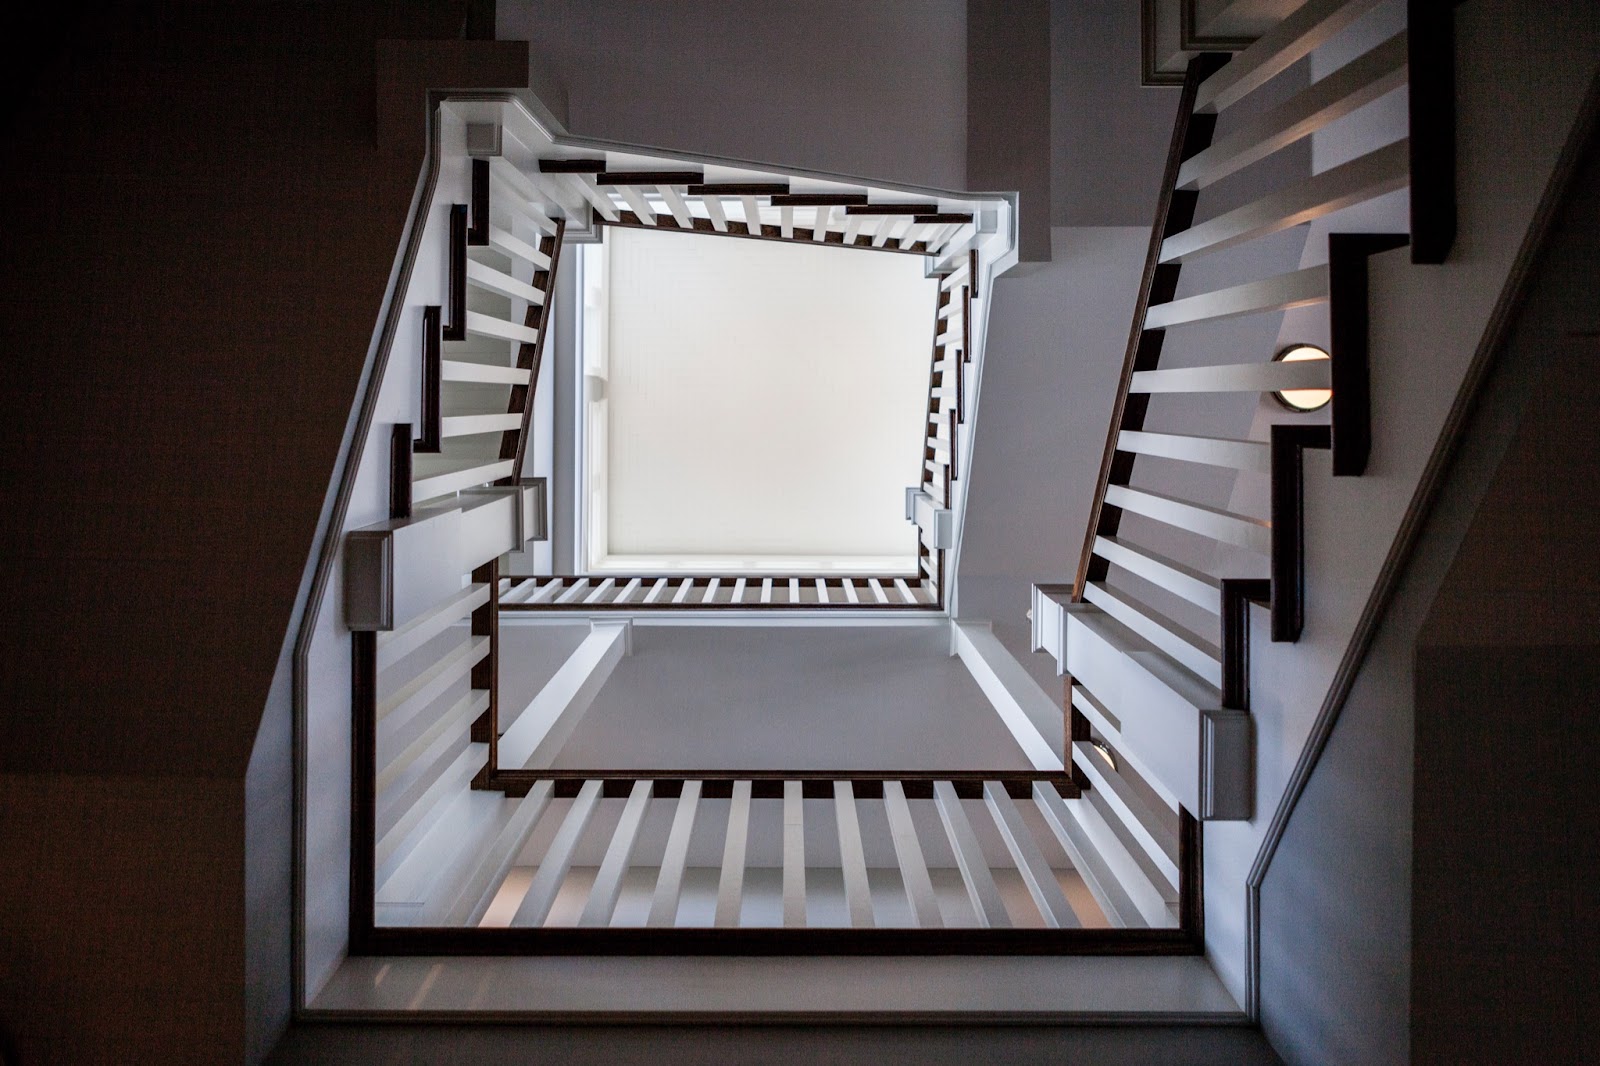 Artistic view of an open, winding staircase looking from ground floor up